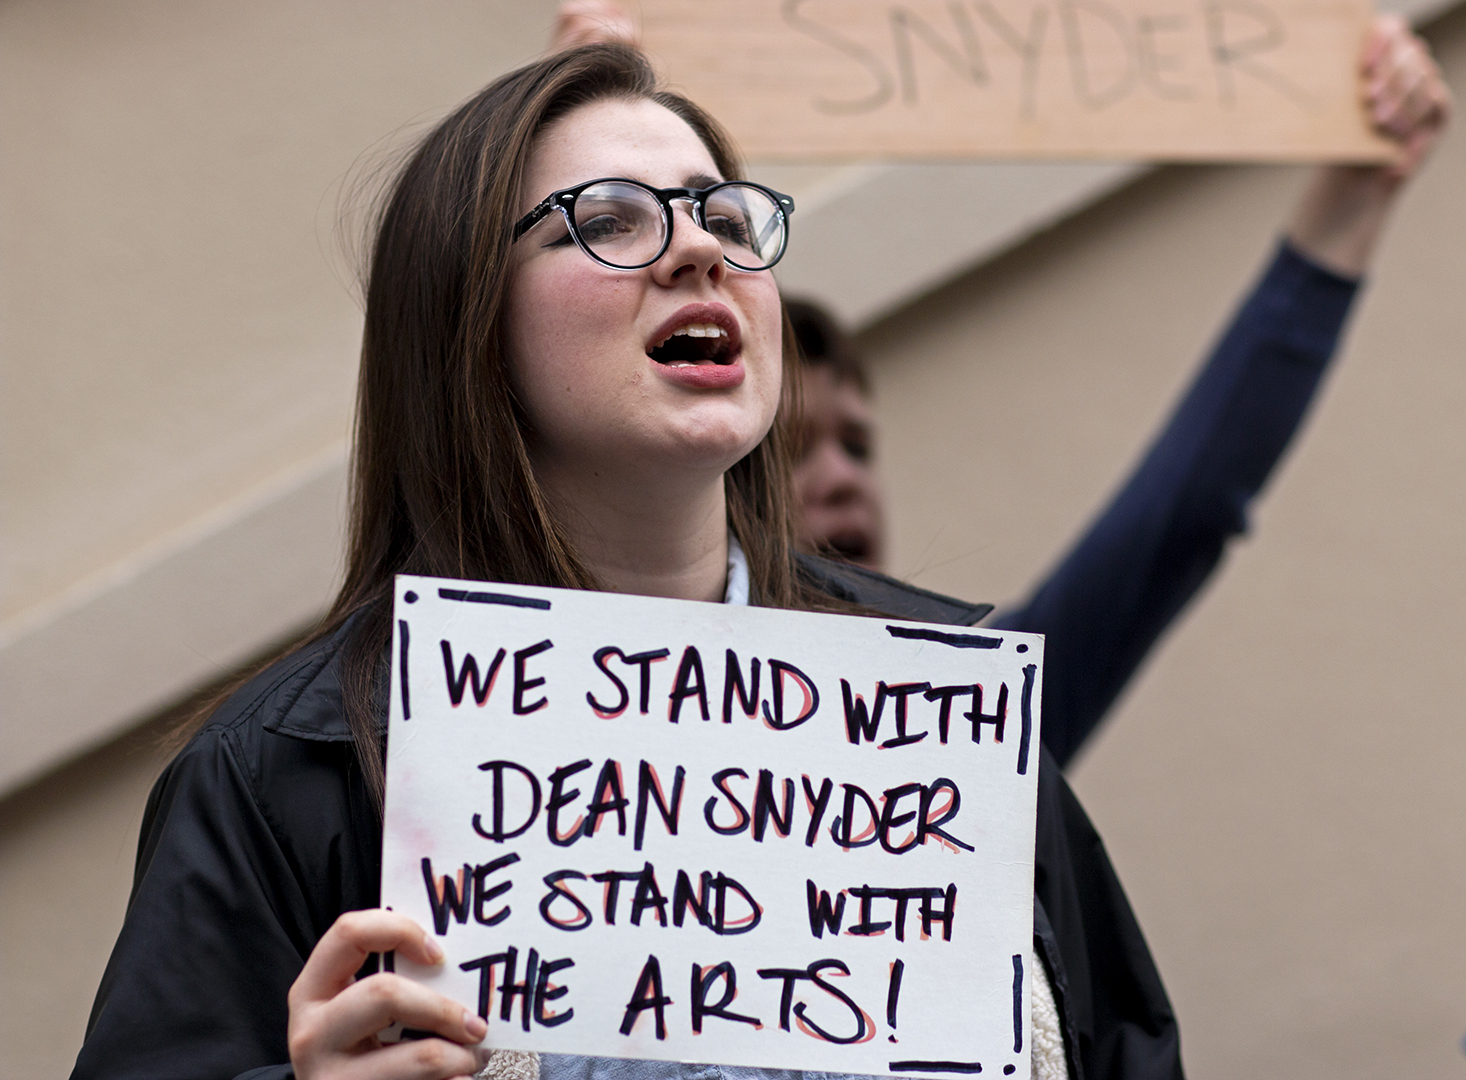 WKU+musical+theatre+student+Hailey+Armstrong+chant+Tell+us+why.+We+want+to+know%2C+with+other+protesters+outside+of+Potter+Hall+and+in+front+of+the+Wetherby+Administration+Building+on+Friday%2C+March+29+following+the+sudden+resignation+of+former+Potter+College+Dean+Larry+Snyder.+Dean+Snyder+was+one+that+often+fought+for+us+PCAL+students+because+he+realized+the+importance+of+Arts+and+Humanities%2C+Armstrong+said.+Its+been+a+great+experience+to+feel+supported+by+my+fellow+protestors+and+students+that+arent+even+in+Potter+College.+Even+a+passing+car+honking+and+waving+as+they+go+by+shows+me+that+even+though+the+attitude+of+this+universitys+administration+is+one+of+disregard+for+the+arts%2C+people+still+understand+what+we+do+and+why+its+important.